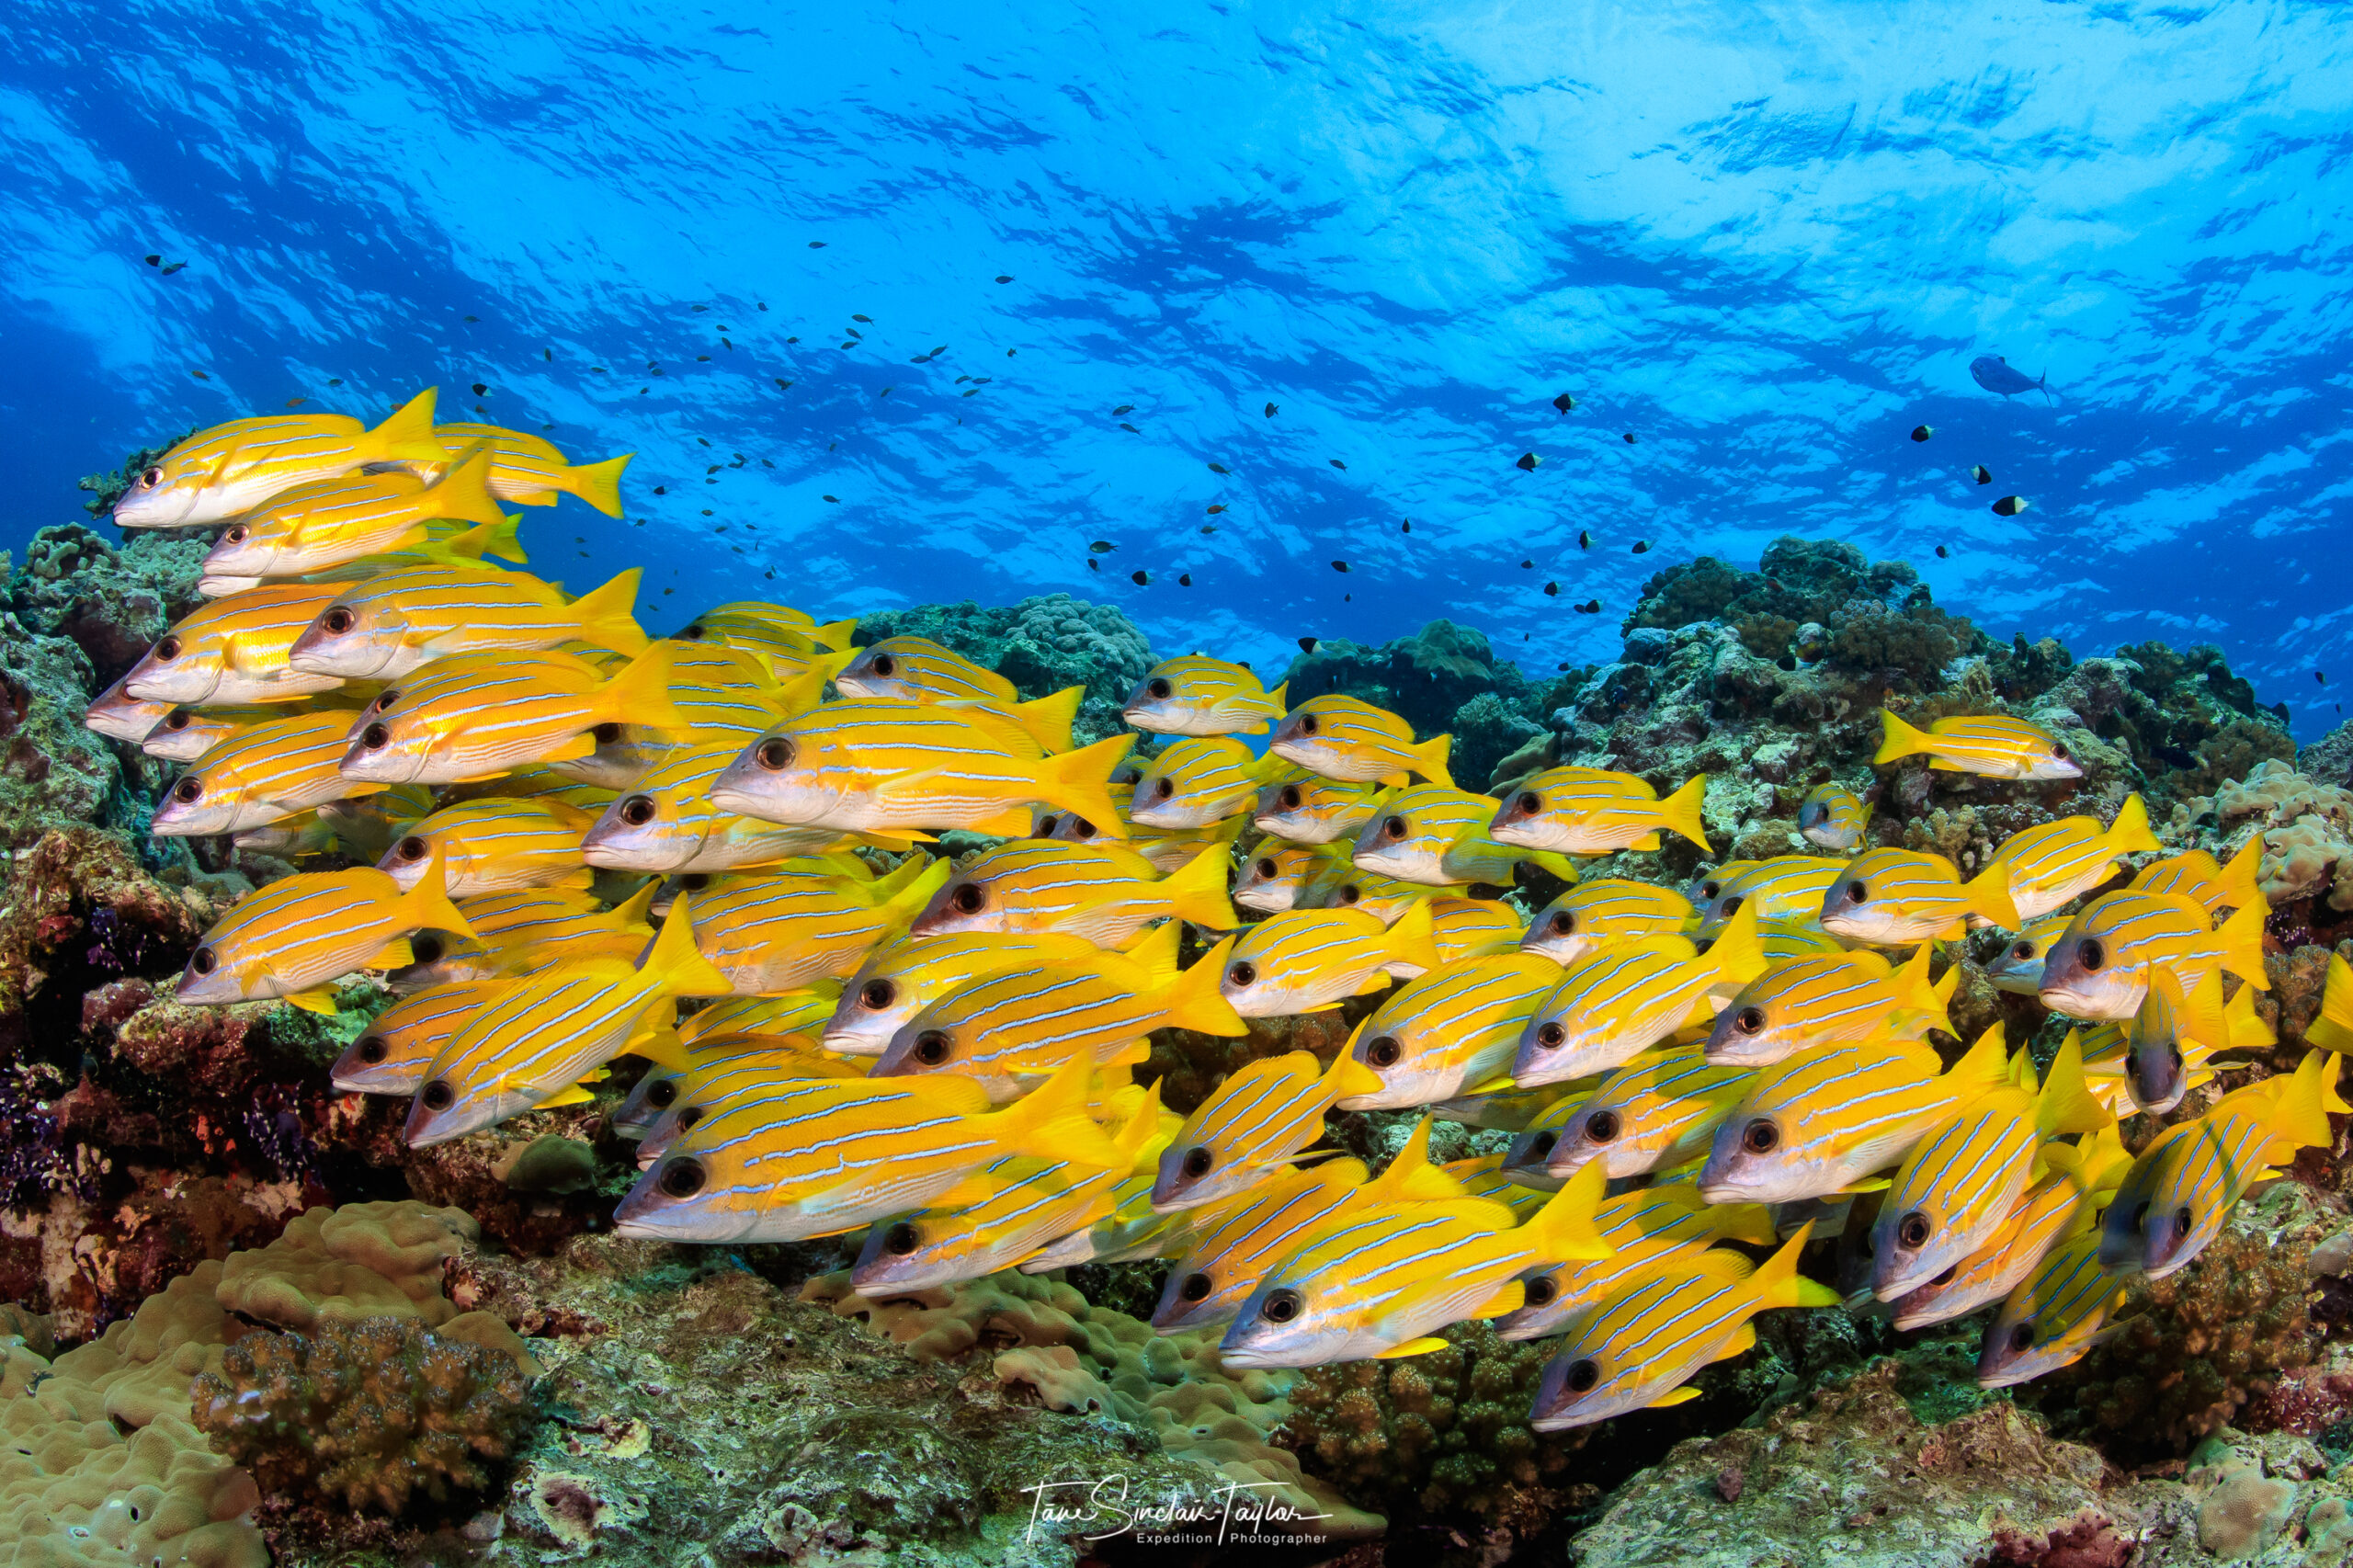 The hidden fish keeping coral reefs alive